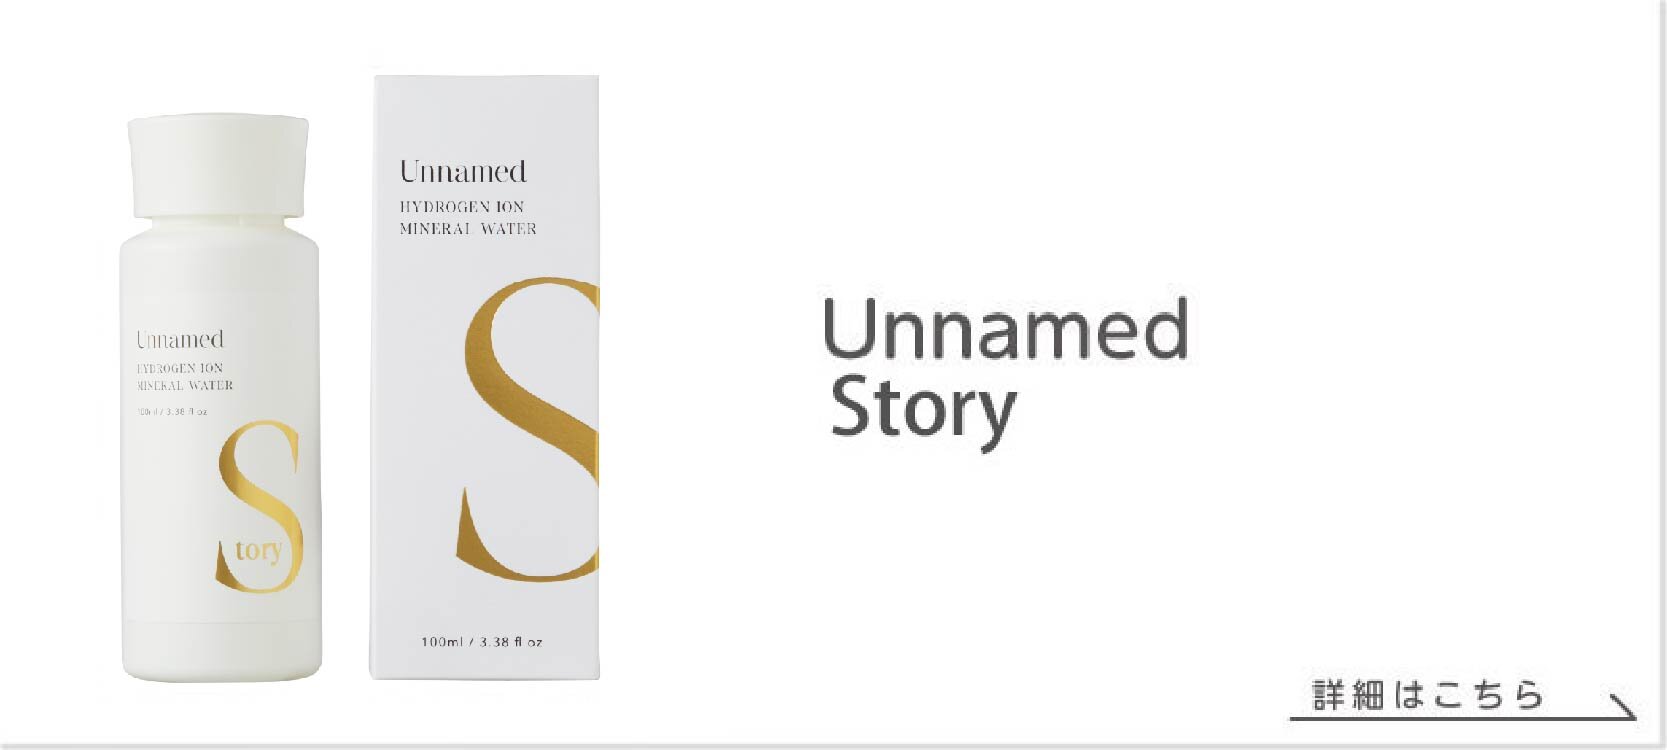 Unnamed story